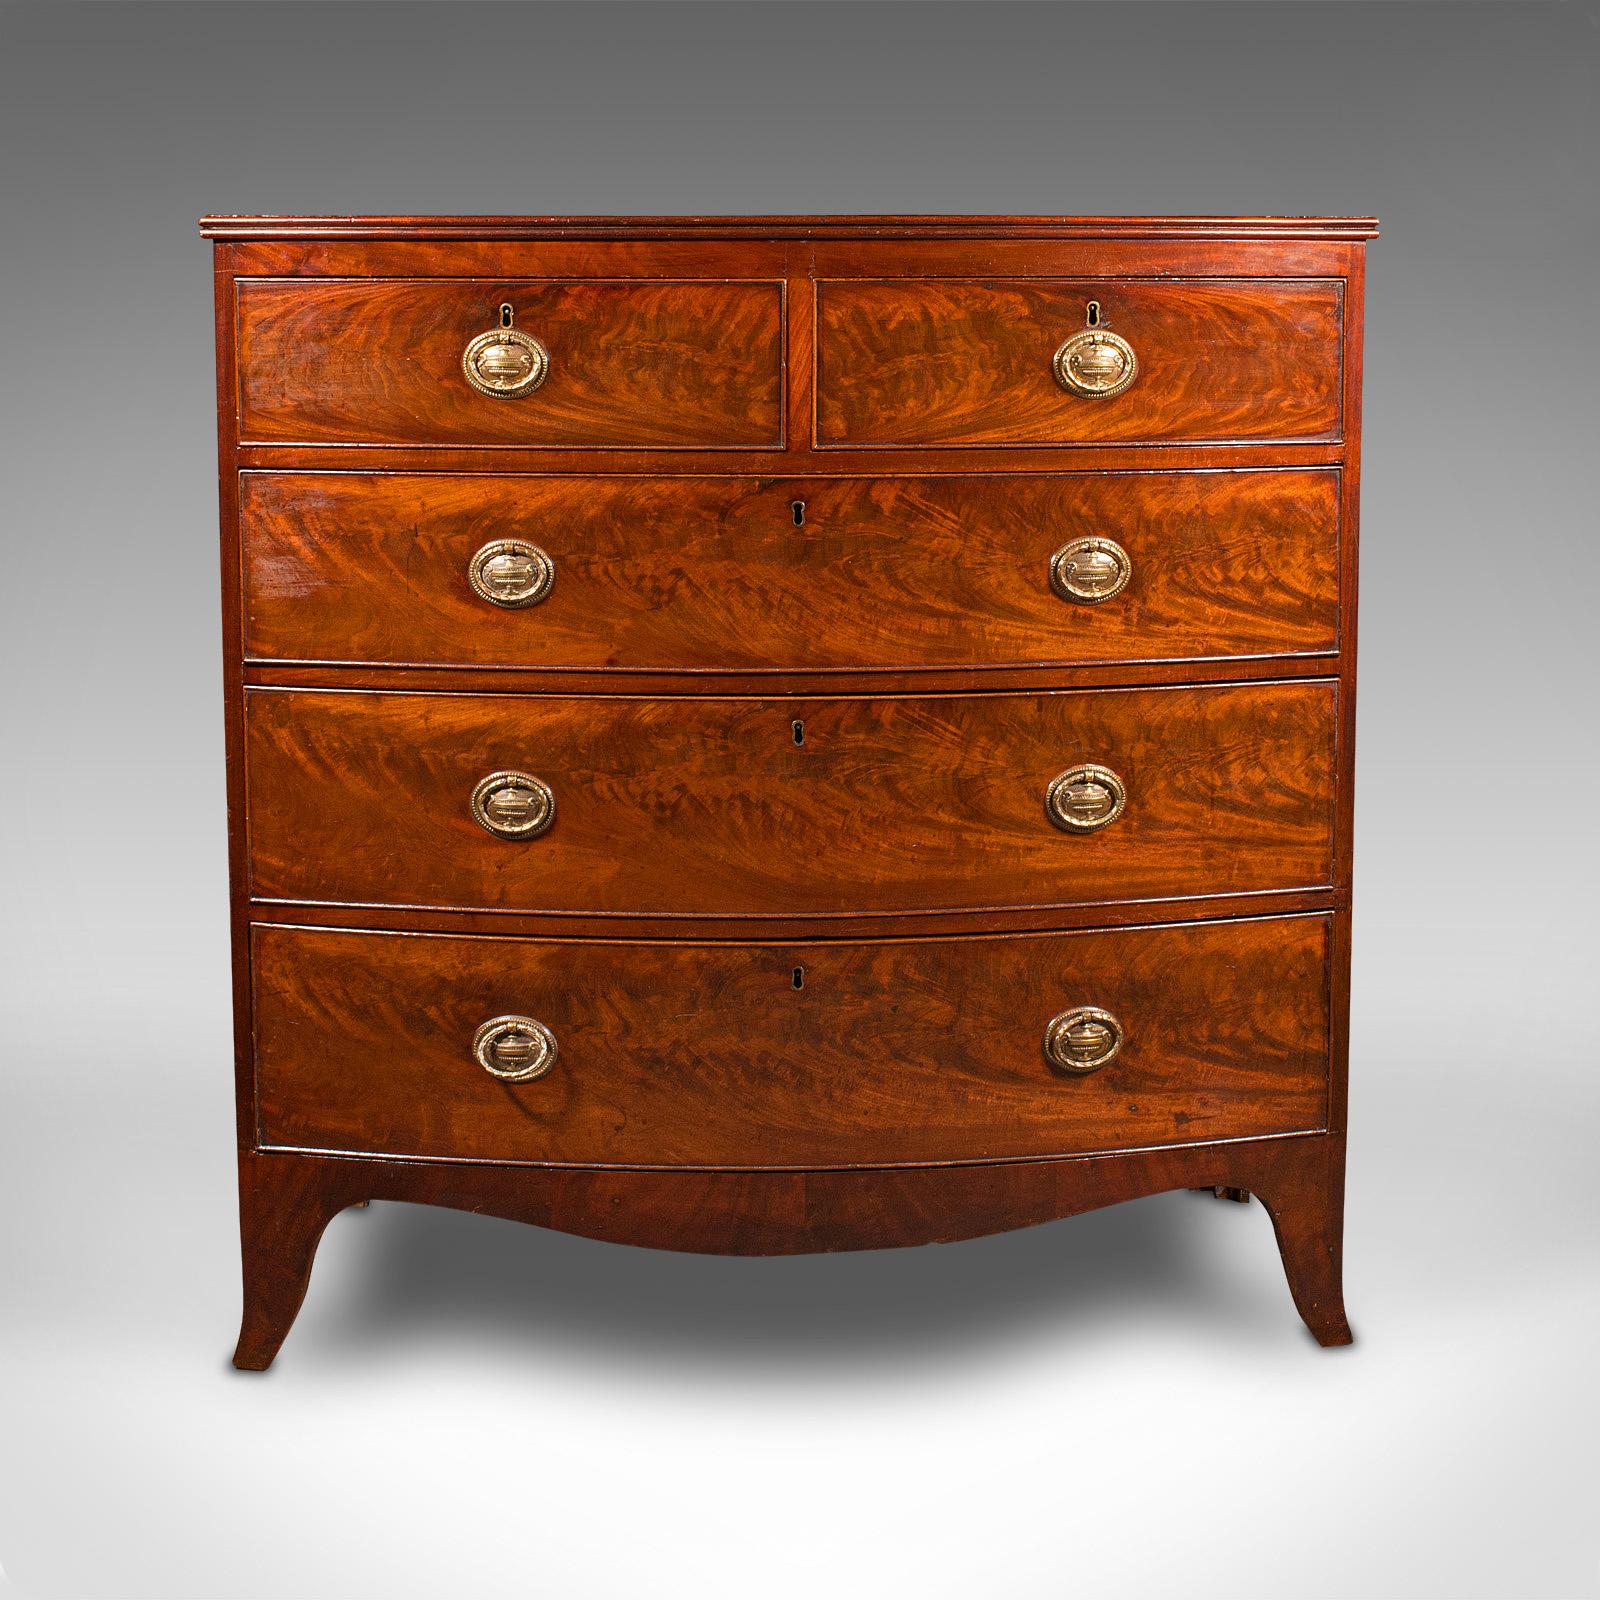 British Large Antique Bow Front Chest of Drawers, English, Tallboy, Georgian, Circa 1780